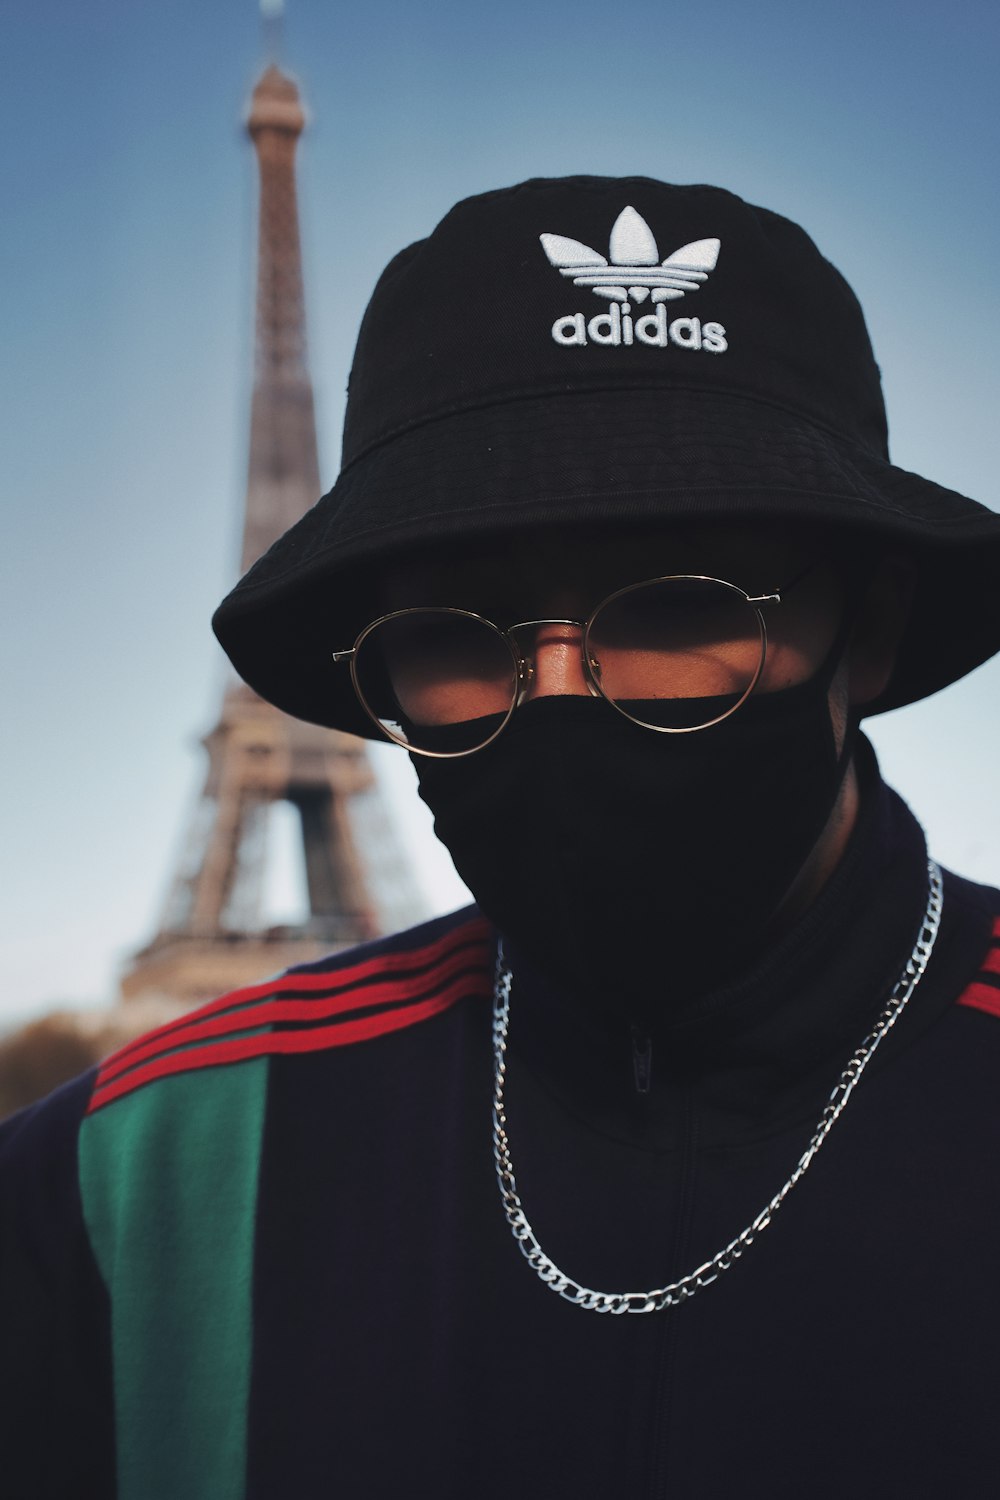 man in black and red shirt wearing black fitted cap and black sunglasses  photo – Free Paris Image on Unsplash